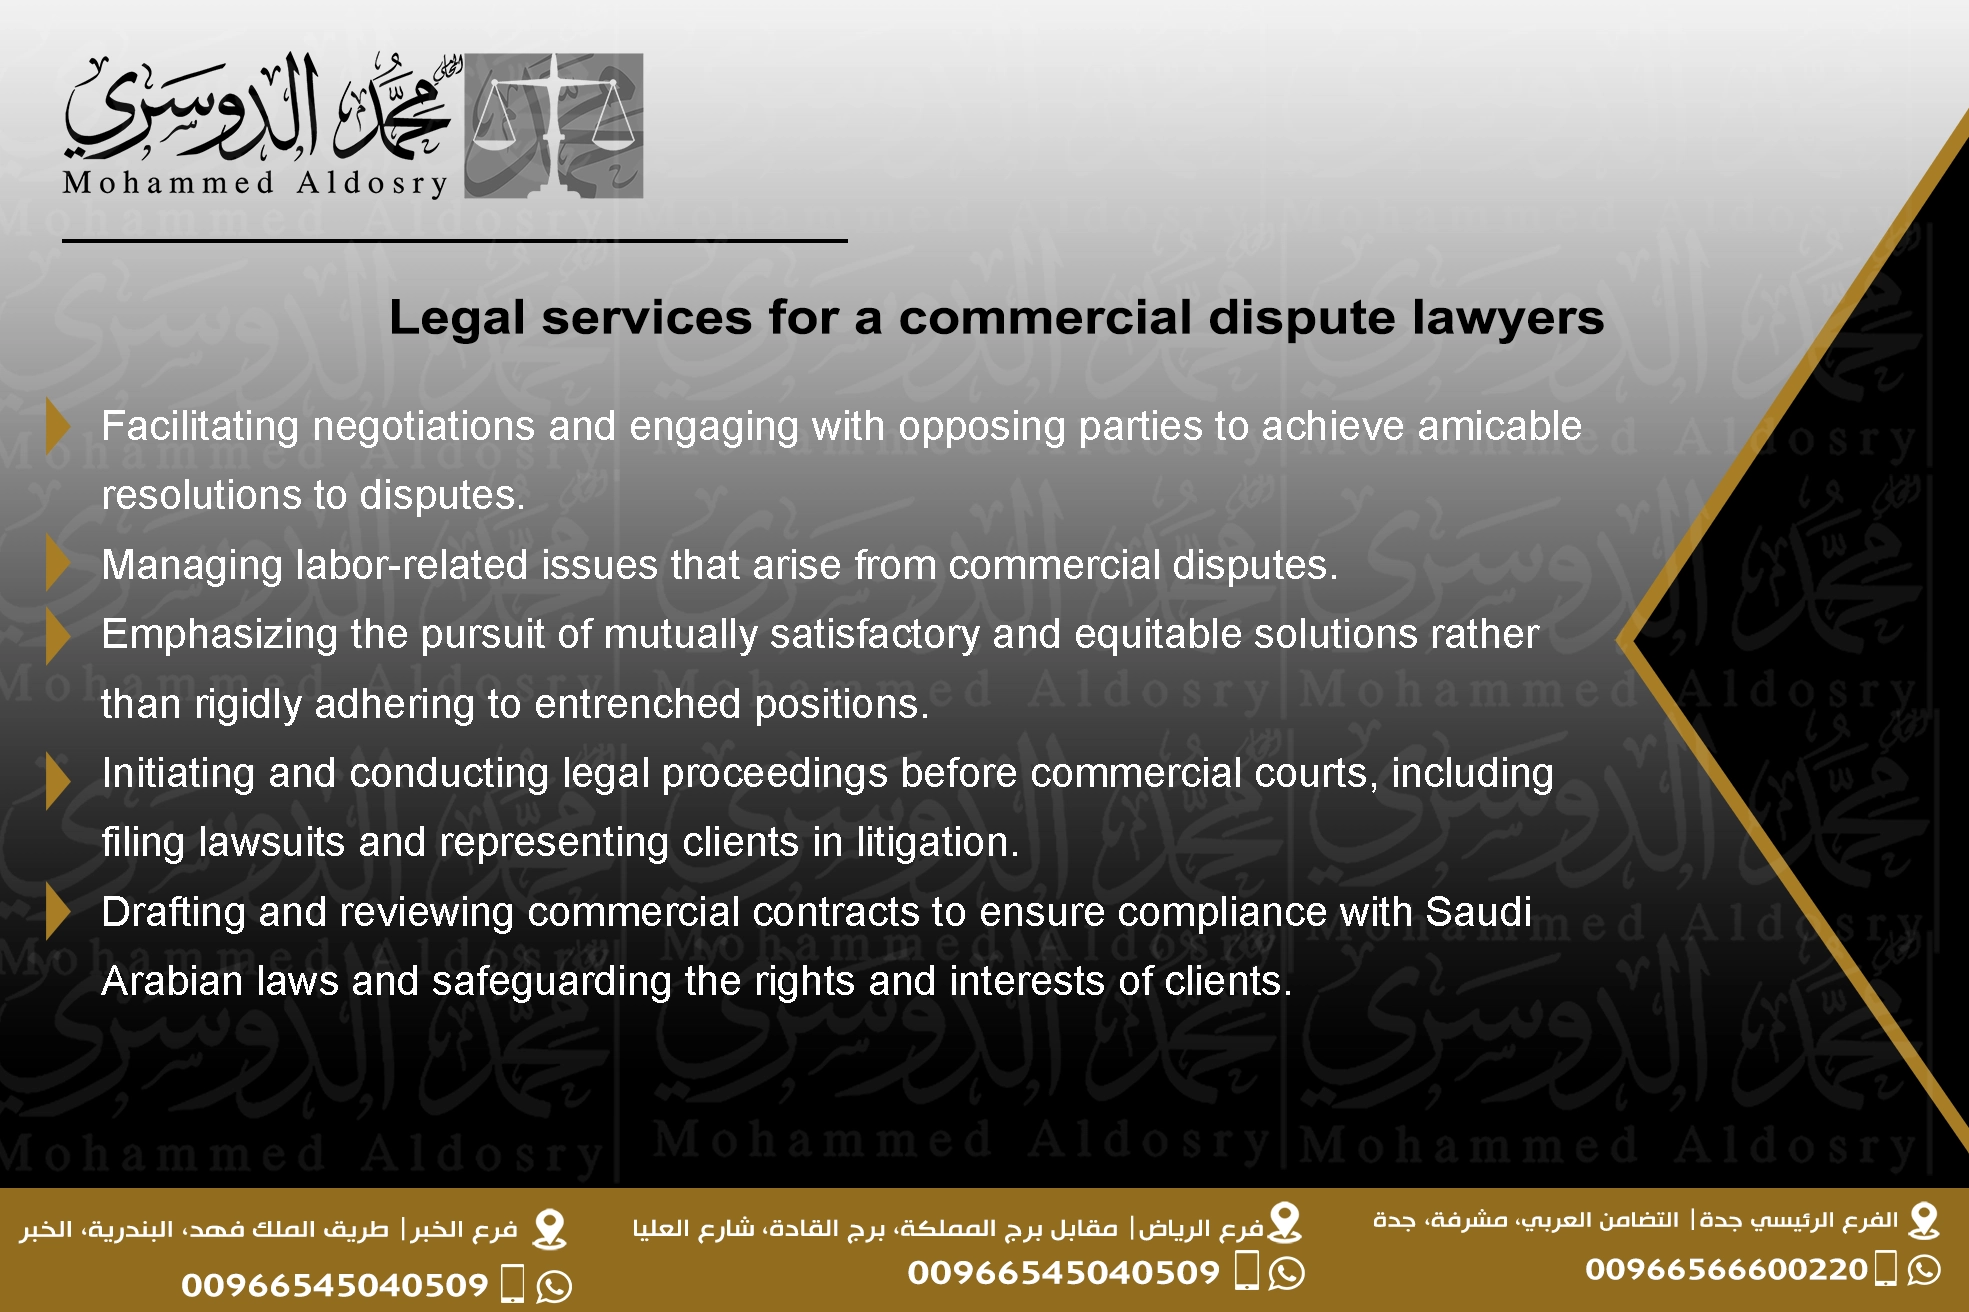 Legal services for a commercial dispute lawyers